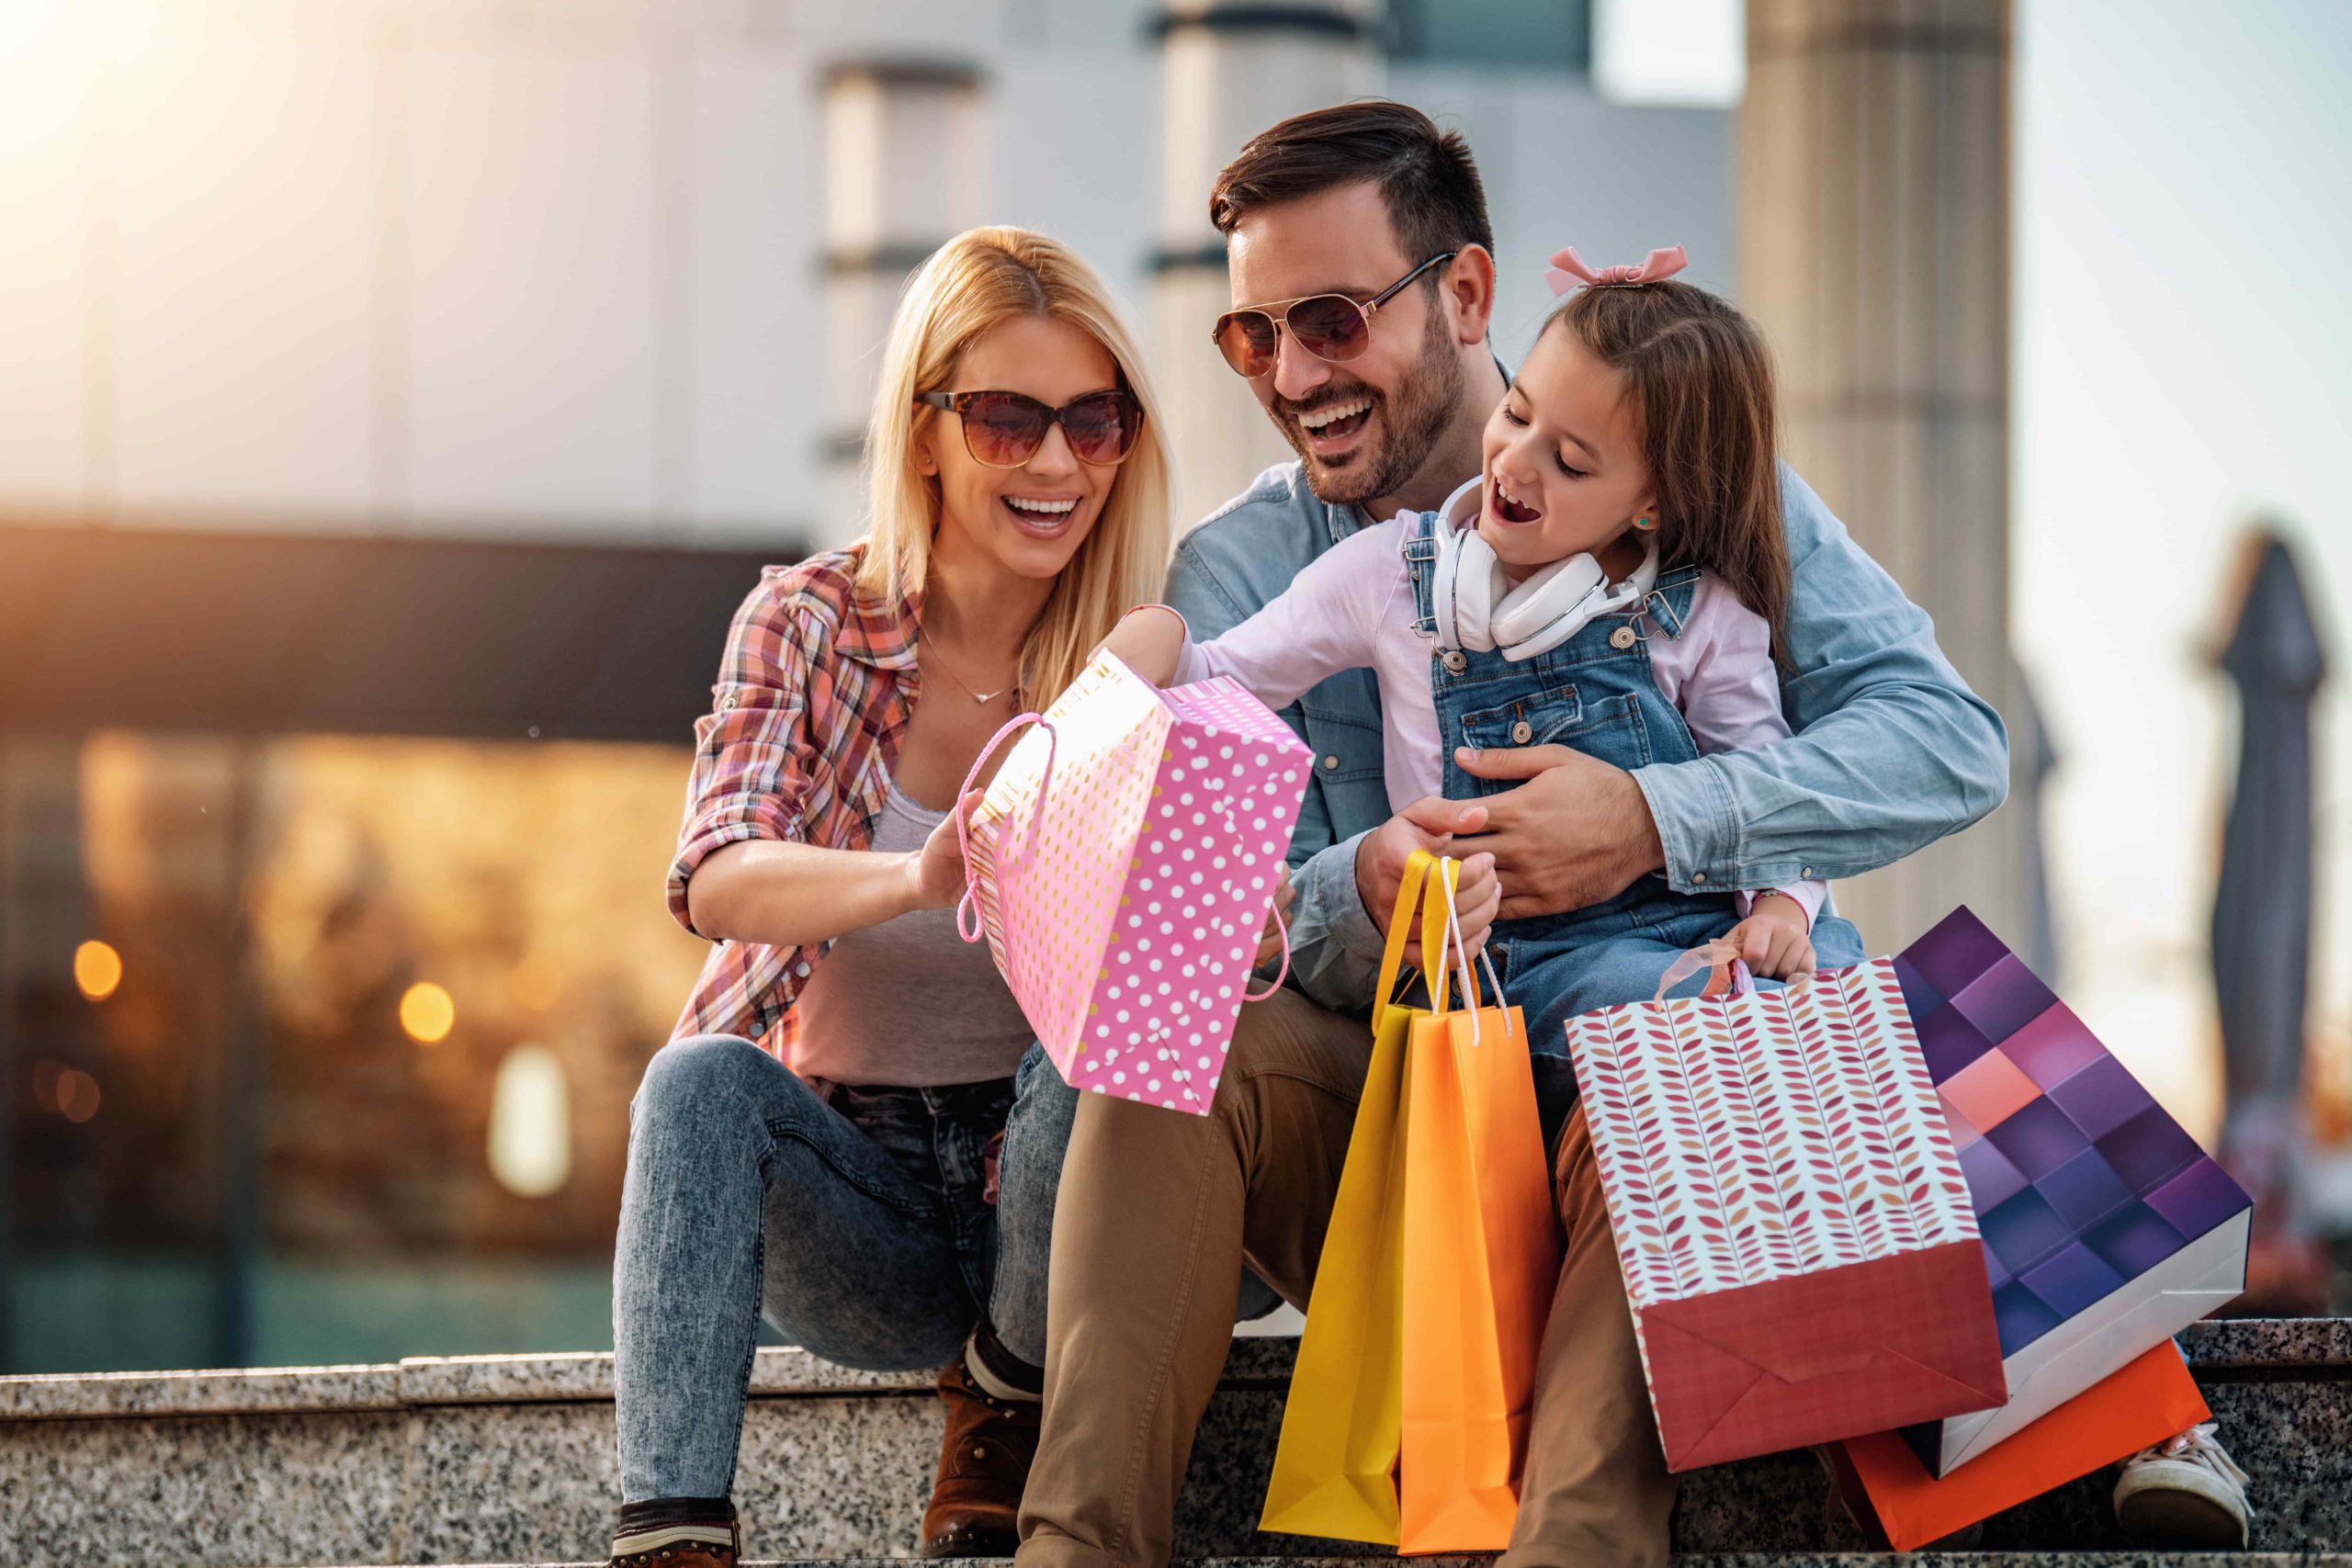 What Is Black Friday? How to Get the Best Holiday Shopping Deals